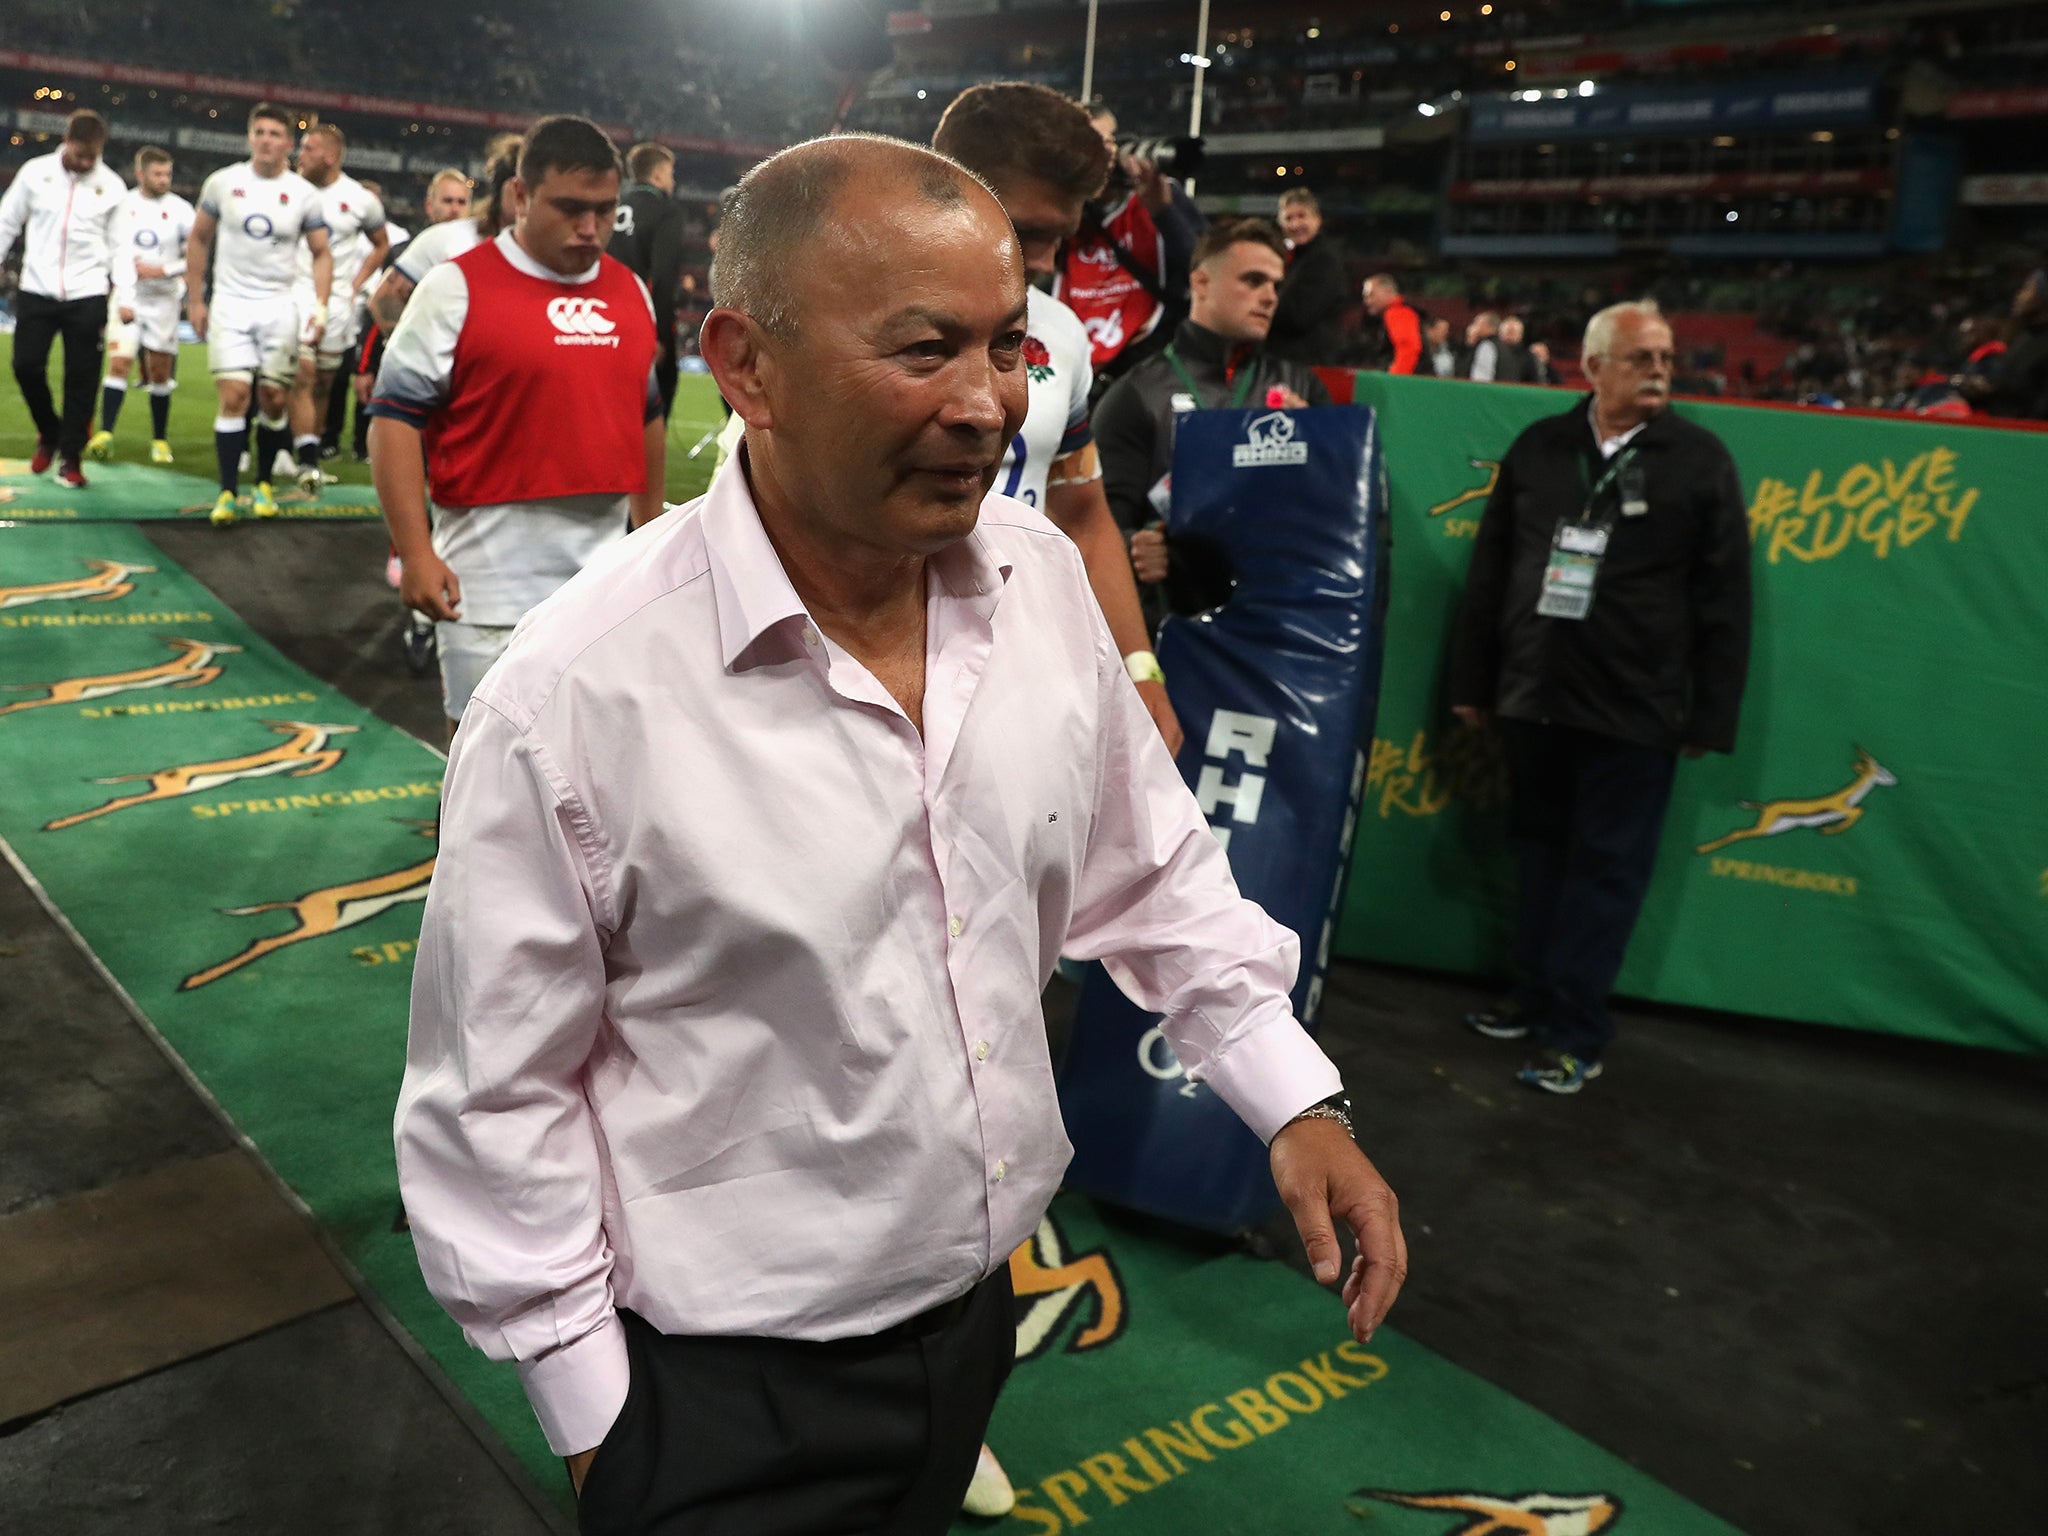 Eddie Jones was involved in a verbal confrontation with South African fans as he left the Ellis Park field